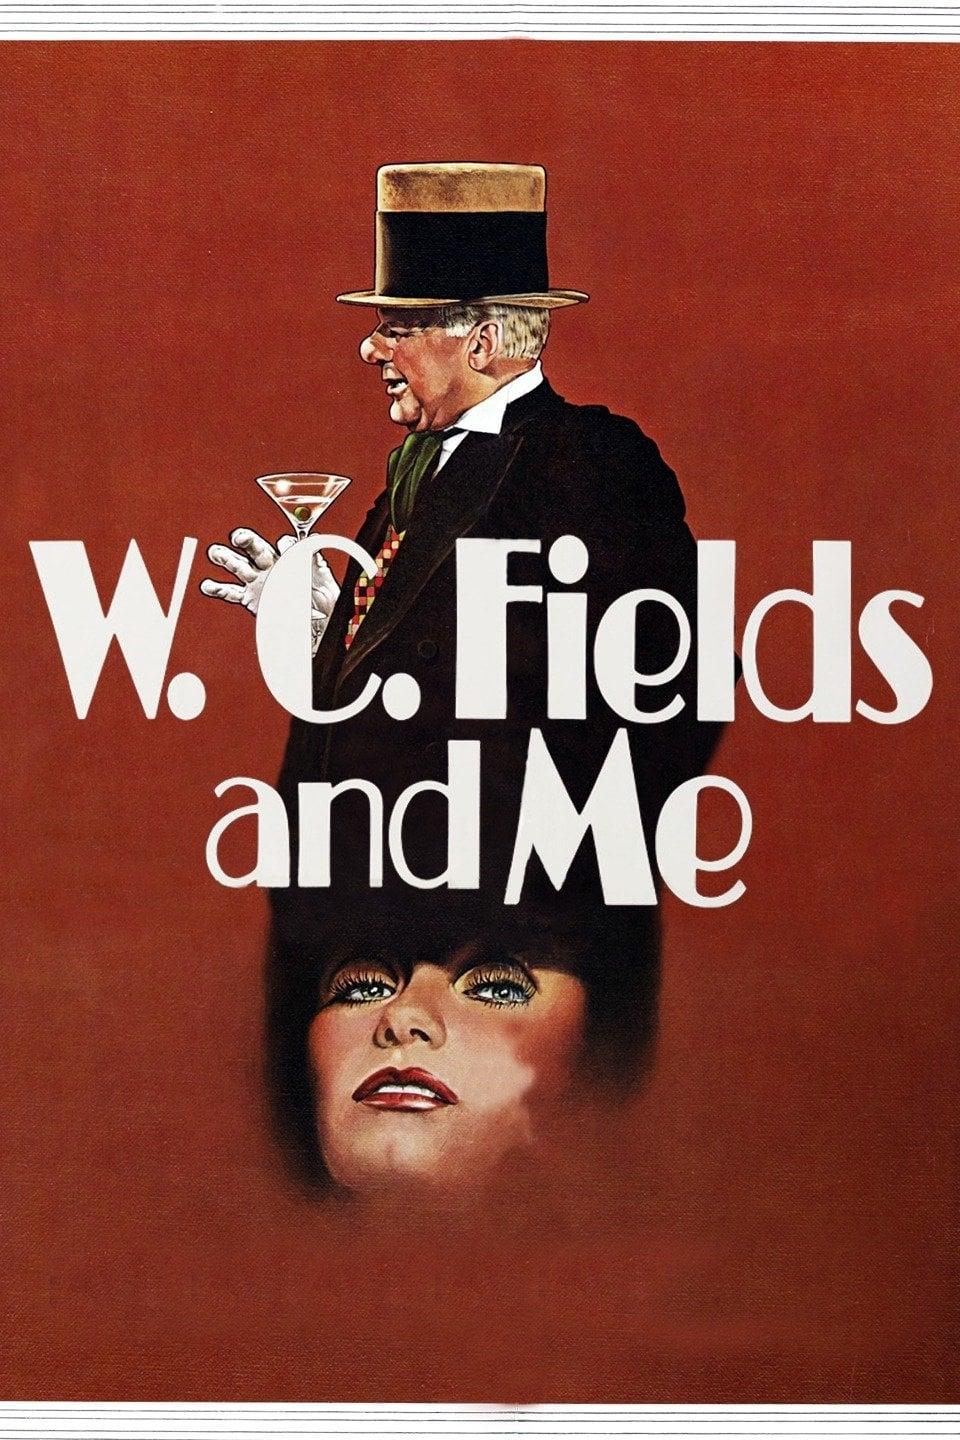 W.C. Fields and Me poster